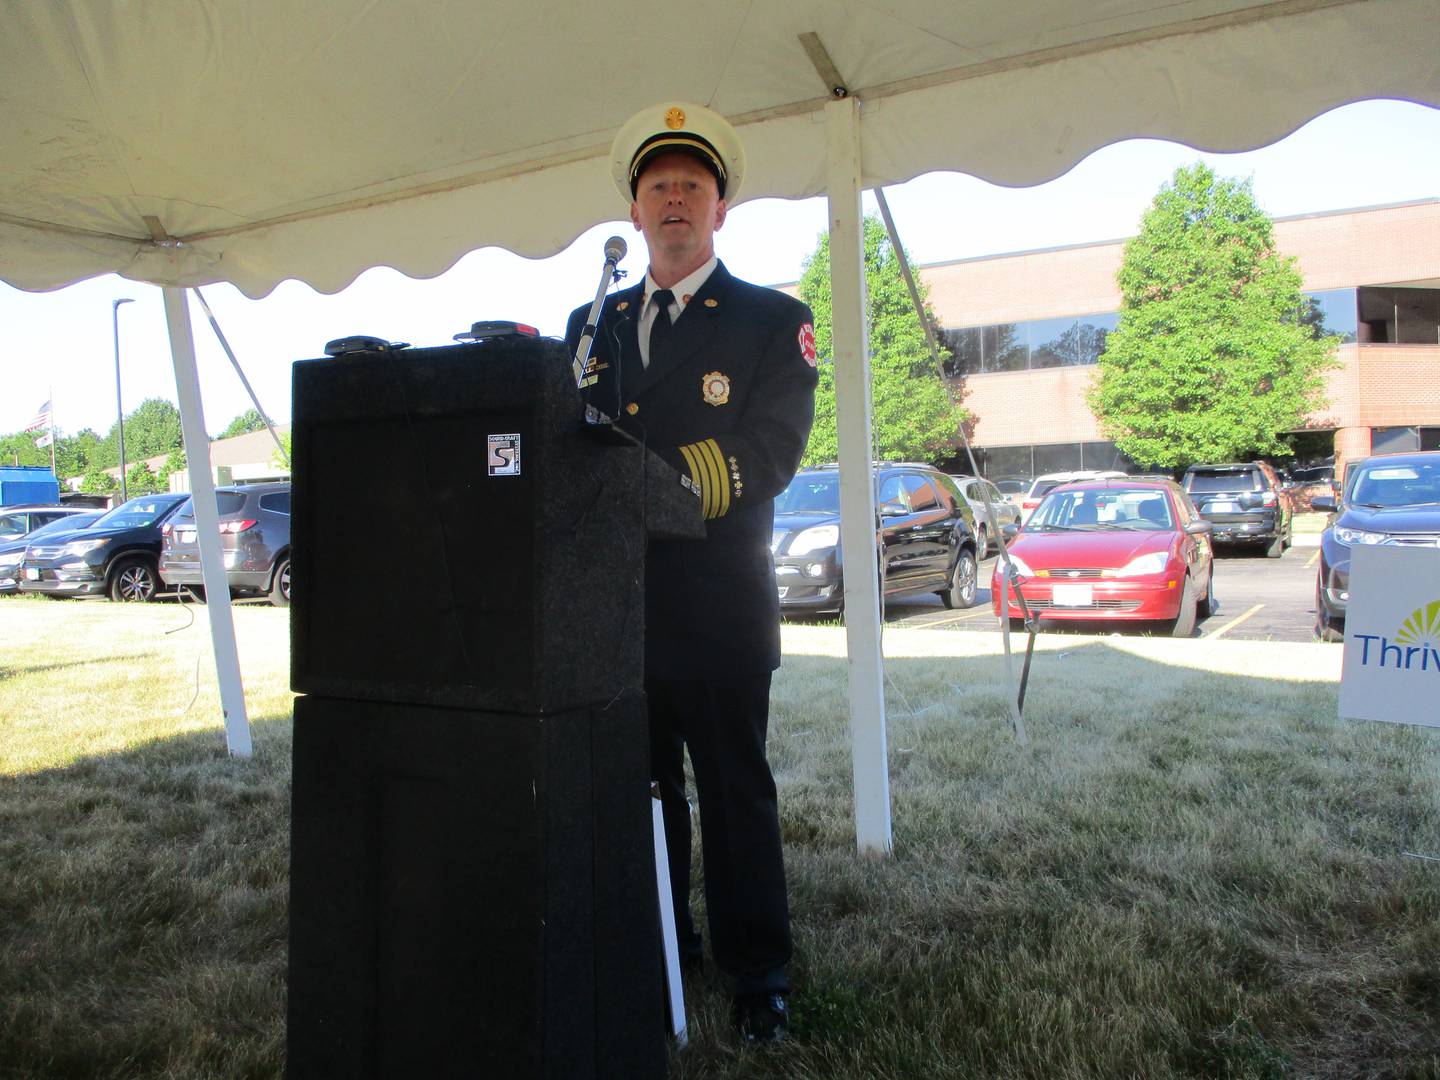 Joliet Deputy Fire Chief Jeff Carey speaks at the ribbon-cutting ceremony on Tuesday, July 12, 2022 for the new Thriveworks mental health clinic in Joliet.